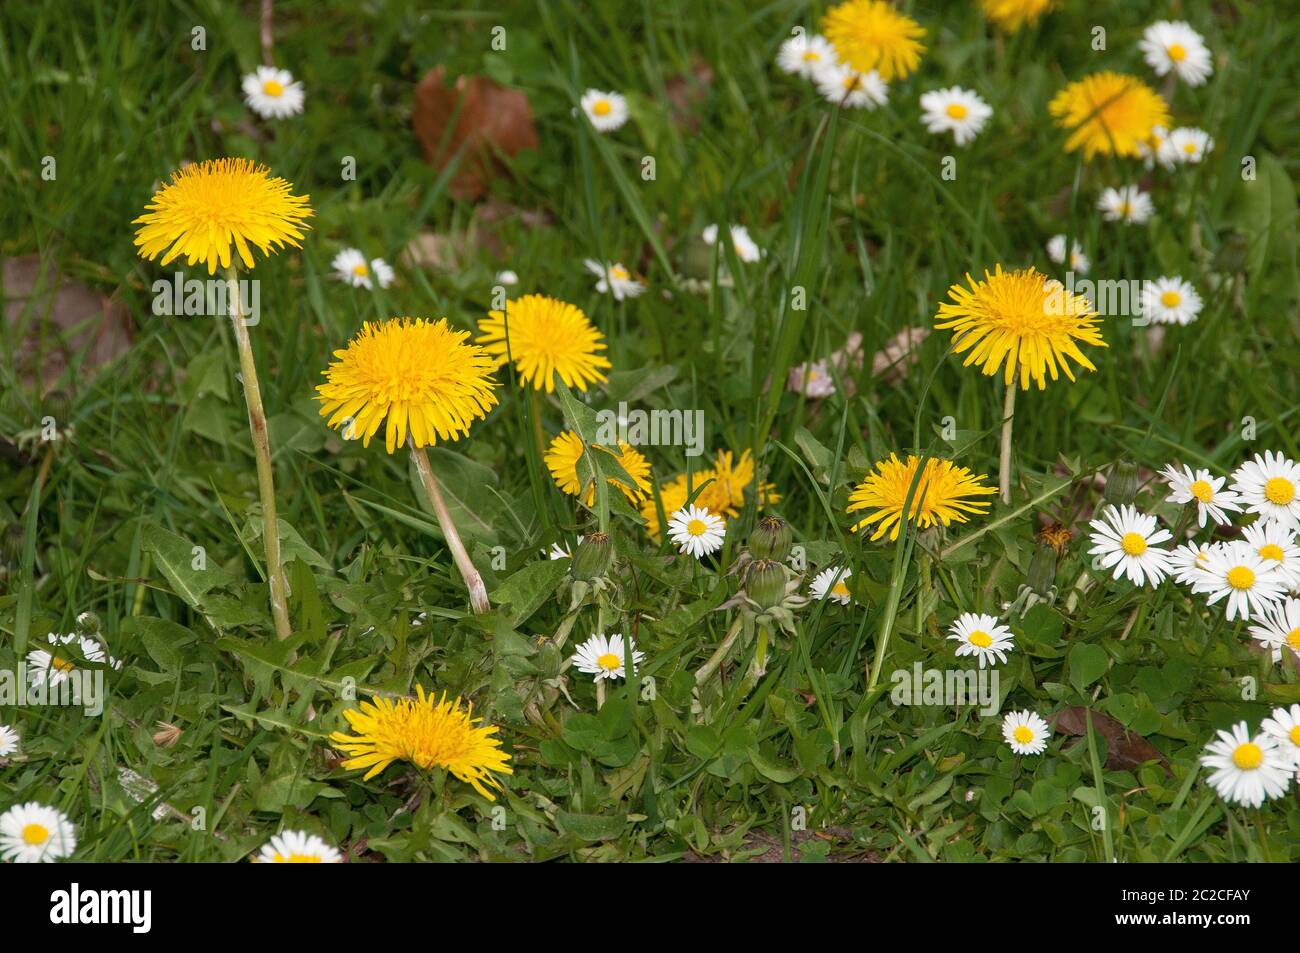 Summer meadow with dandelion Stock Photo